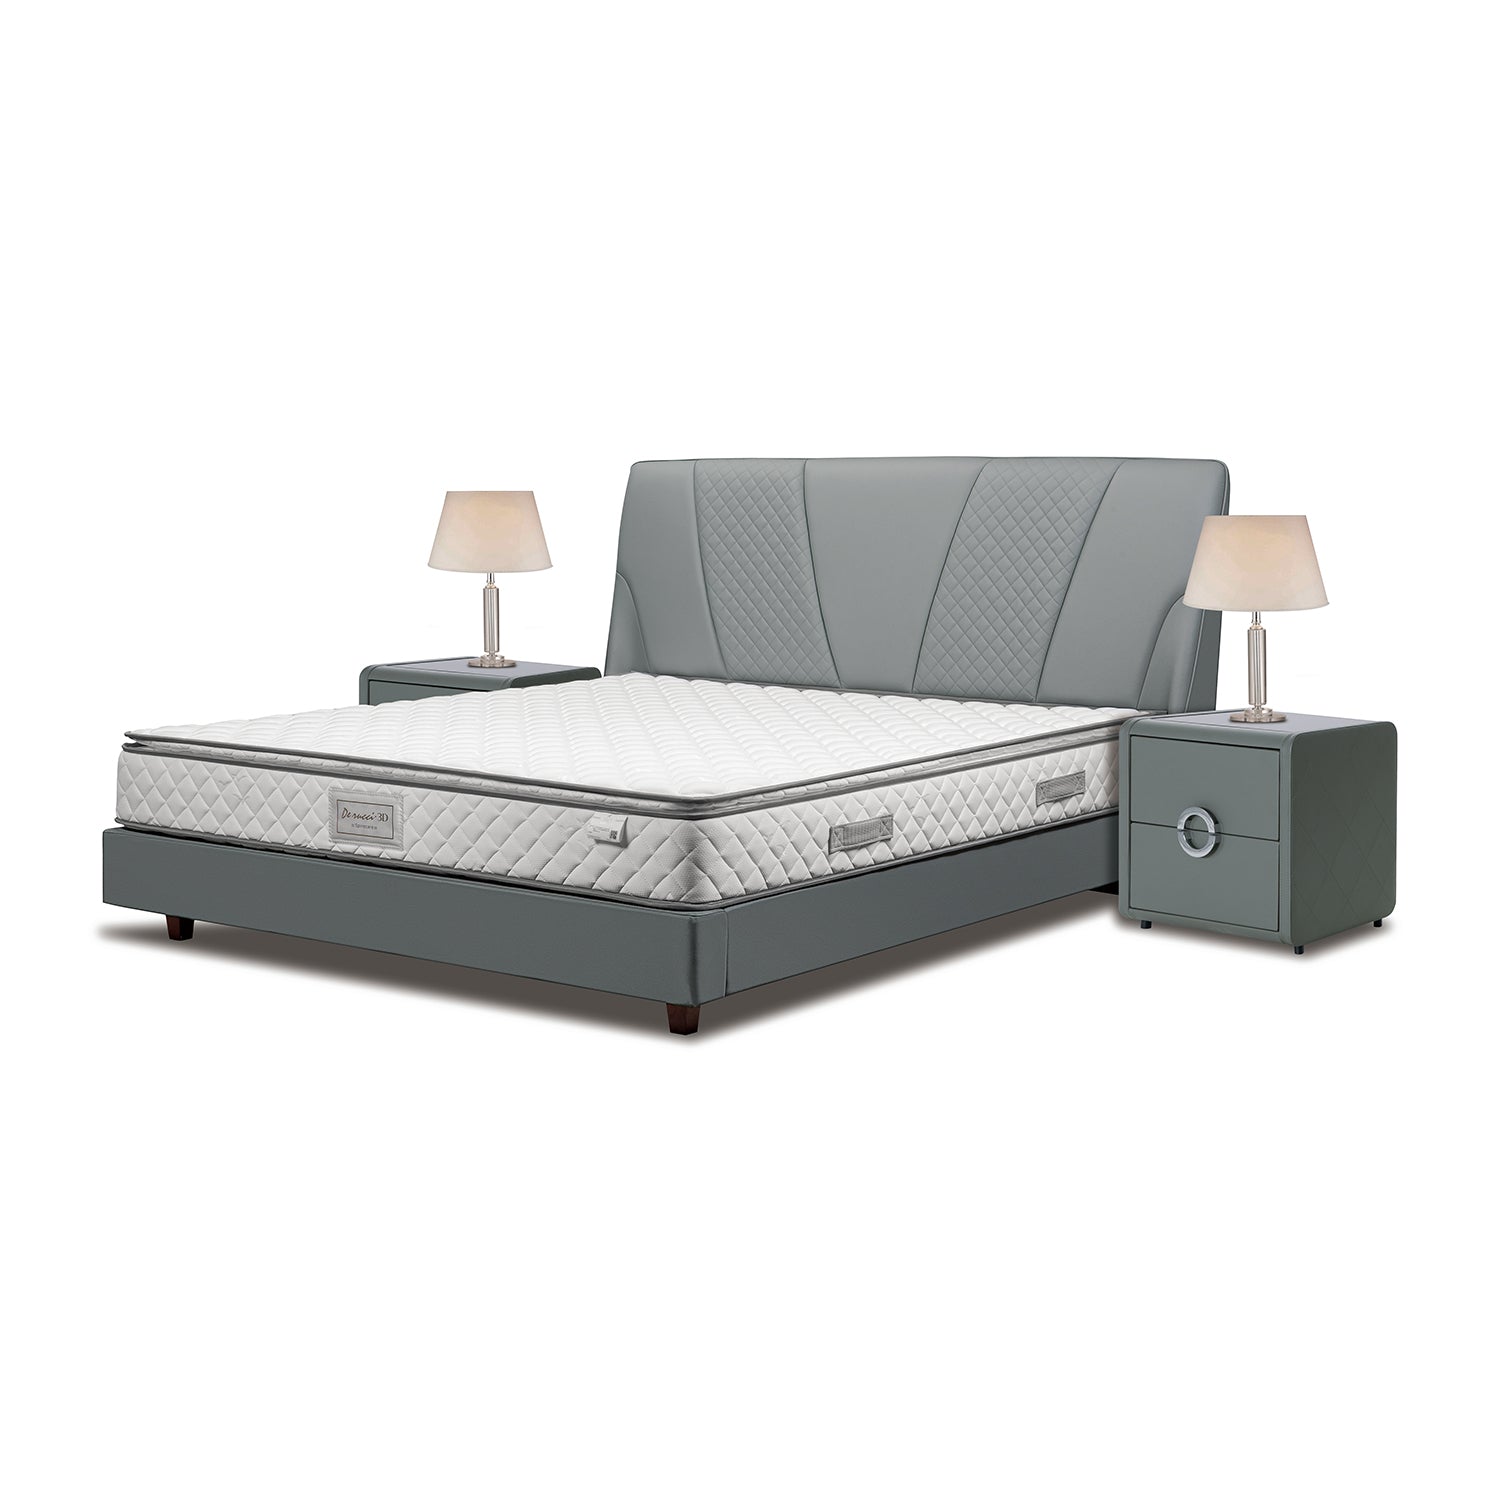 DeRUCCI bed frame BOC1-005 with grey upholstered headboard, white mattress, and bedside tables with lamps